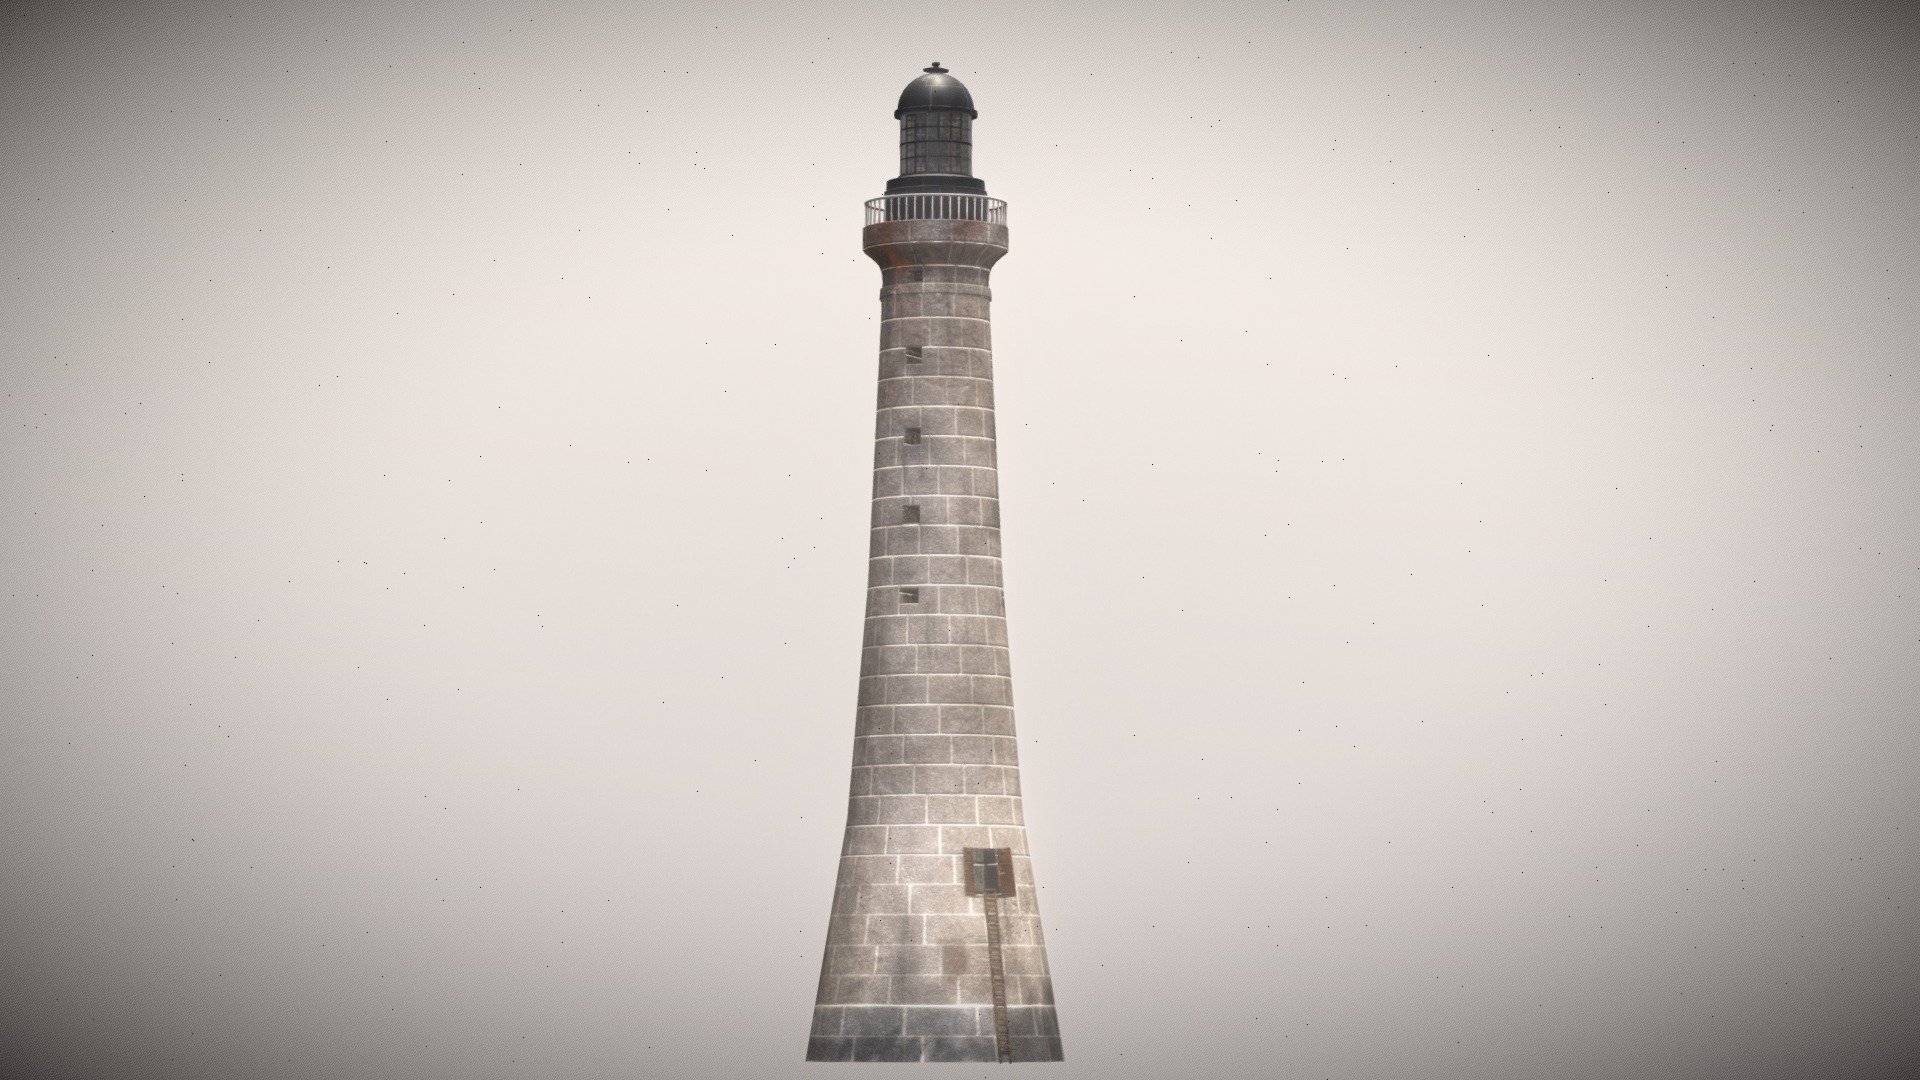 It was very instructive to color the lighthouse in a substance painter and to be realistic at the same time. Since the 1st year, I often choose utopia. But eventually, I start to get tired of it. And I notice that designing in the real world can teach you a lot. So it is with Skerryvore. I learn how to color dirty or mold 3d model